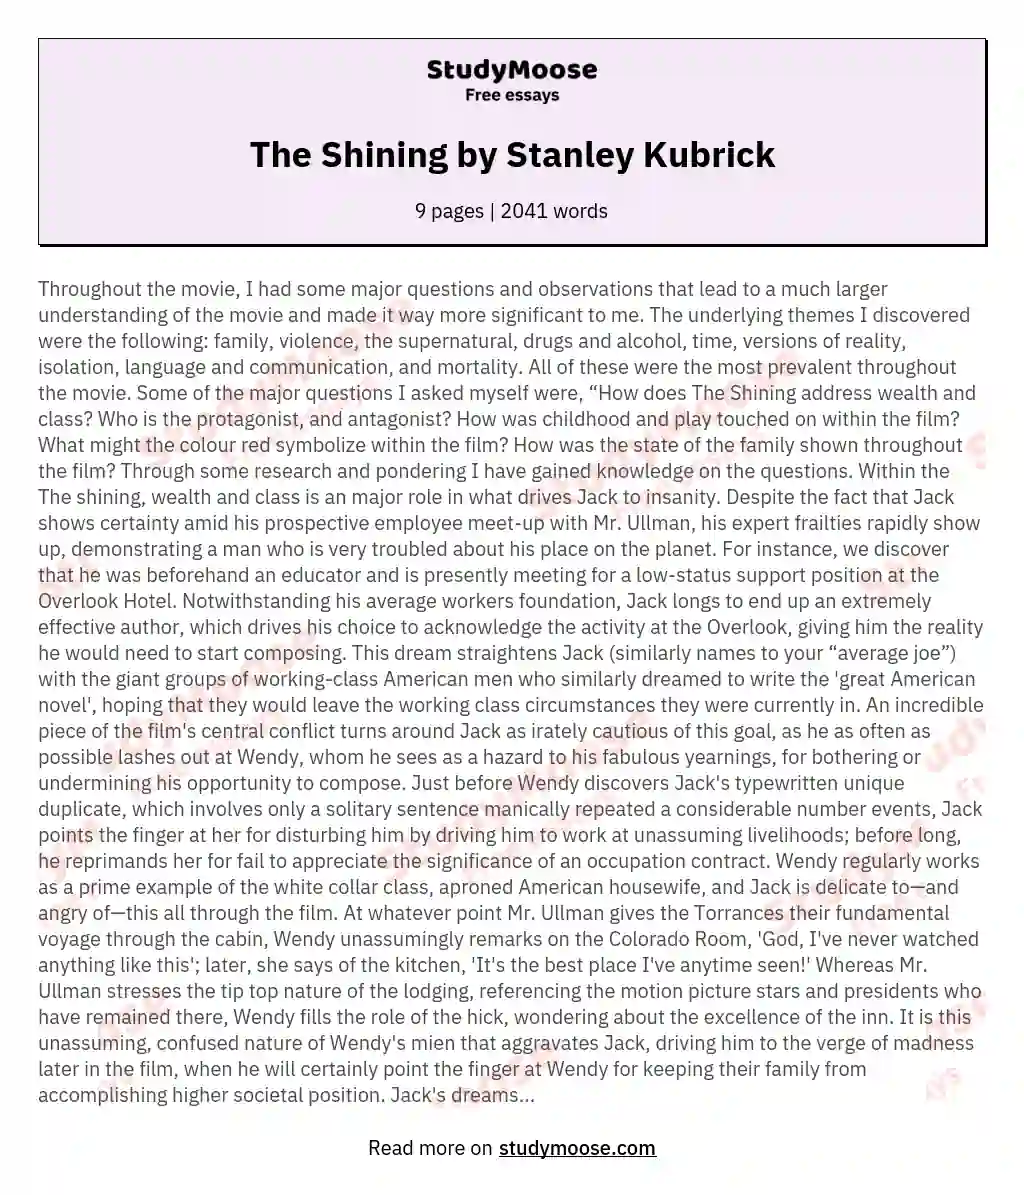 The Shining by Stanley Kubrick